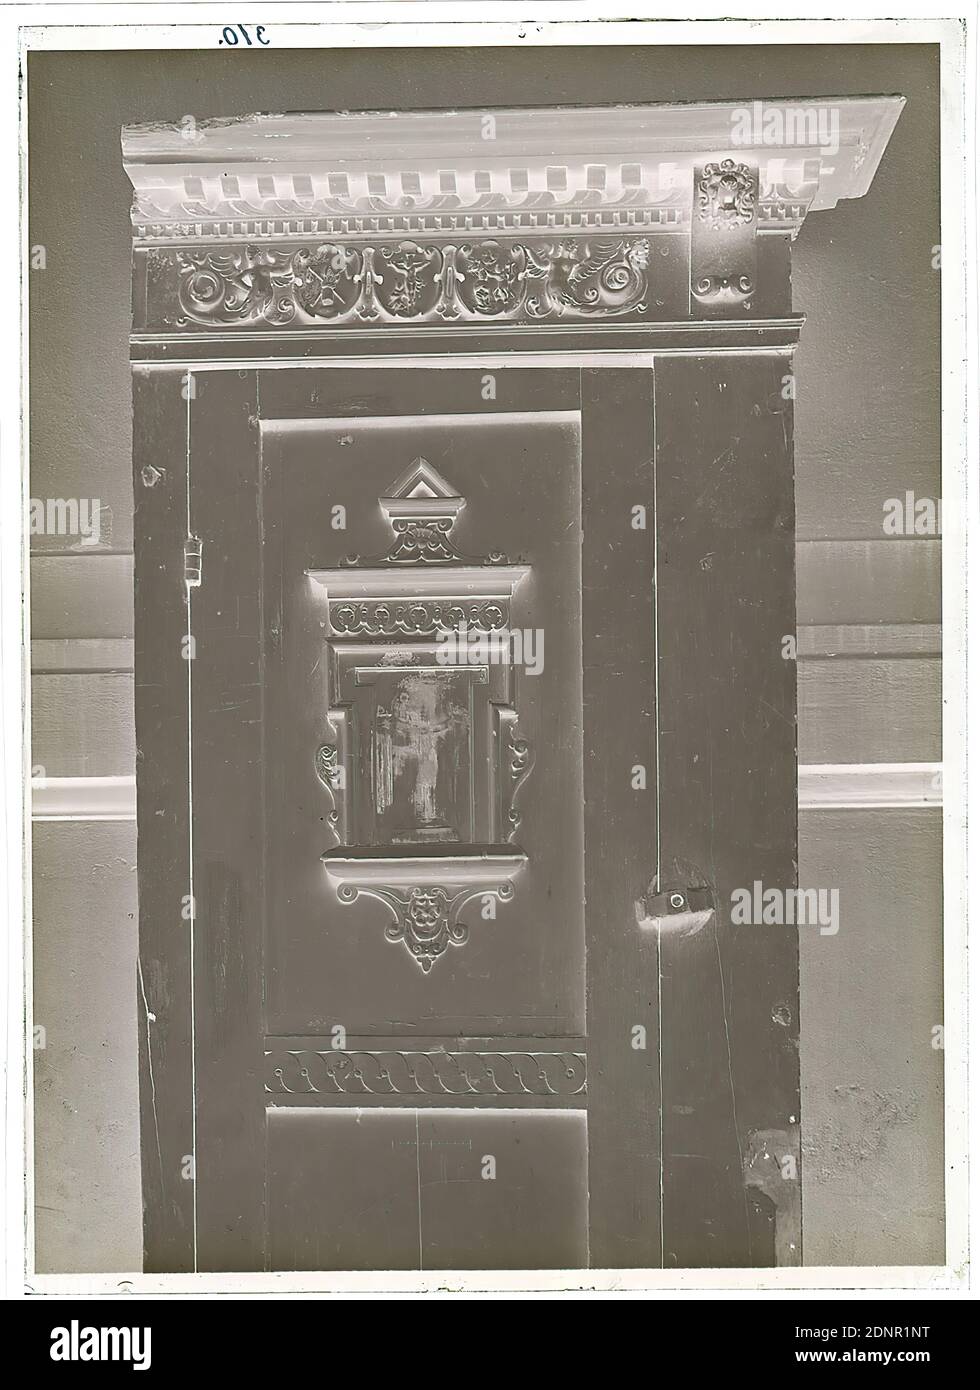 Wilhelm Weimar, corner cabinet, glass negative, black and white negative process, total: height: 23.8 cm; width: 17.8 cm, numbered: top left. : in black ink: 310, handicraft, arts and crafts, industrial design, cabinet, wood (building materials), coat of arms, heraldic symbol, animals as ornament, sea nymphs, ornaments, architectural details, work of applied arts (wood, z. As a trained engraver and graduate of the School of Arts and Crafts Stock Photo